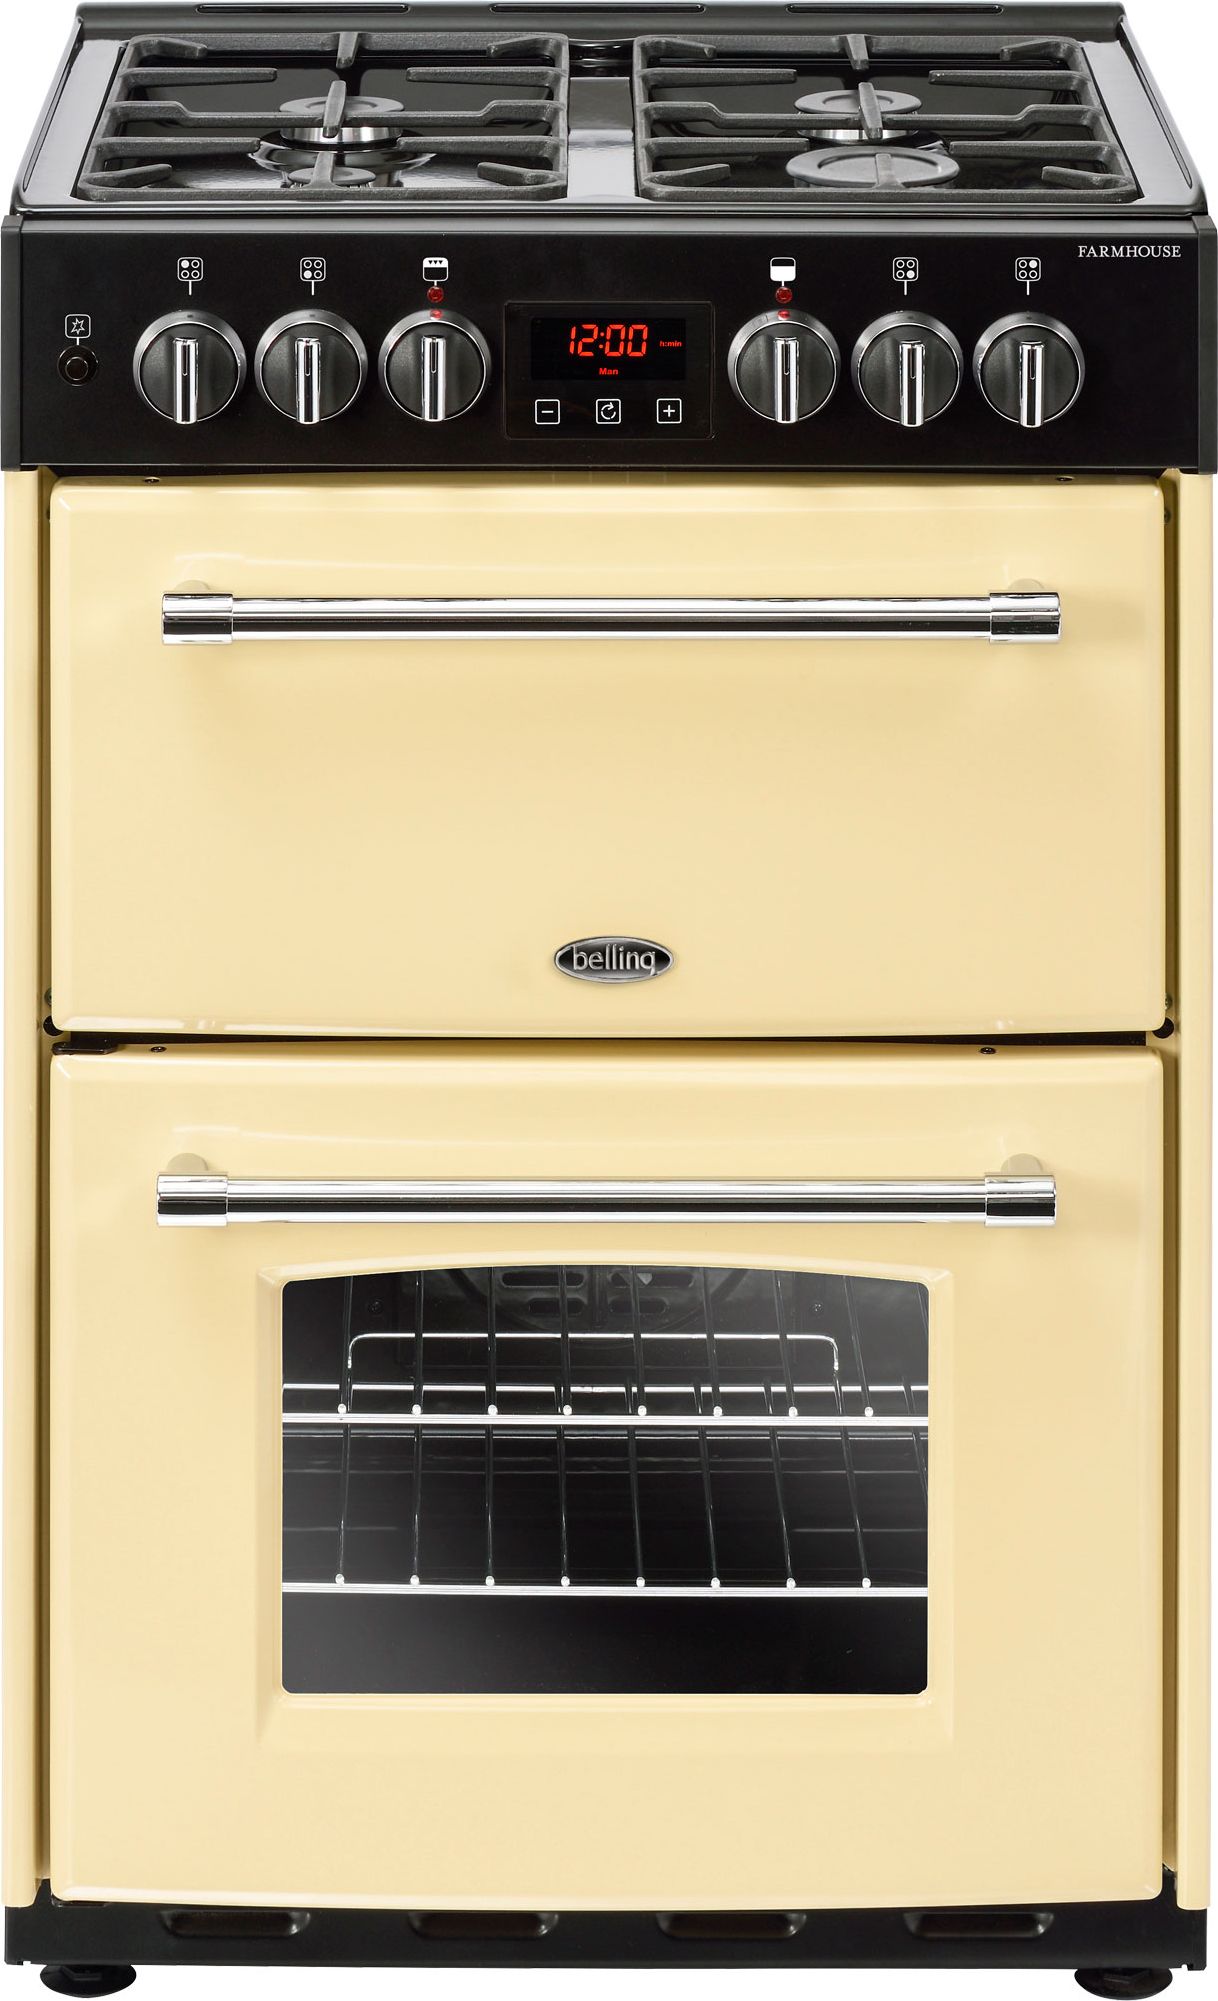 Belling Farmhouse60DF 60cm Freestanding Dual Fuel Cooker - Cream - A/A Rated, Cream